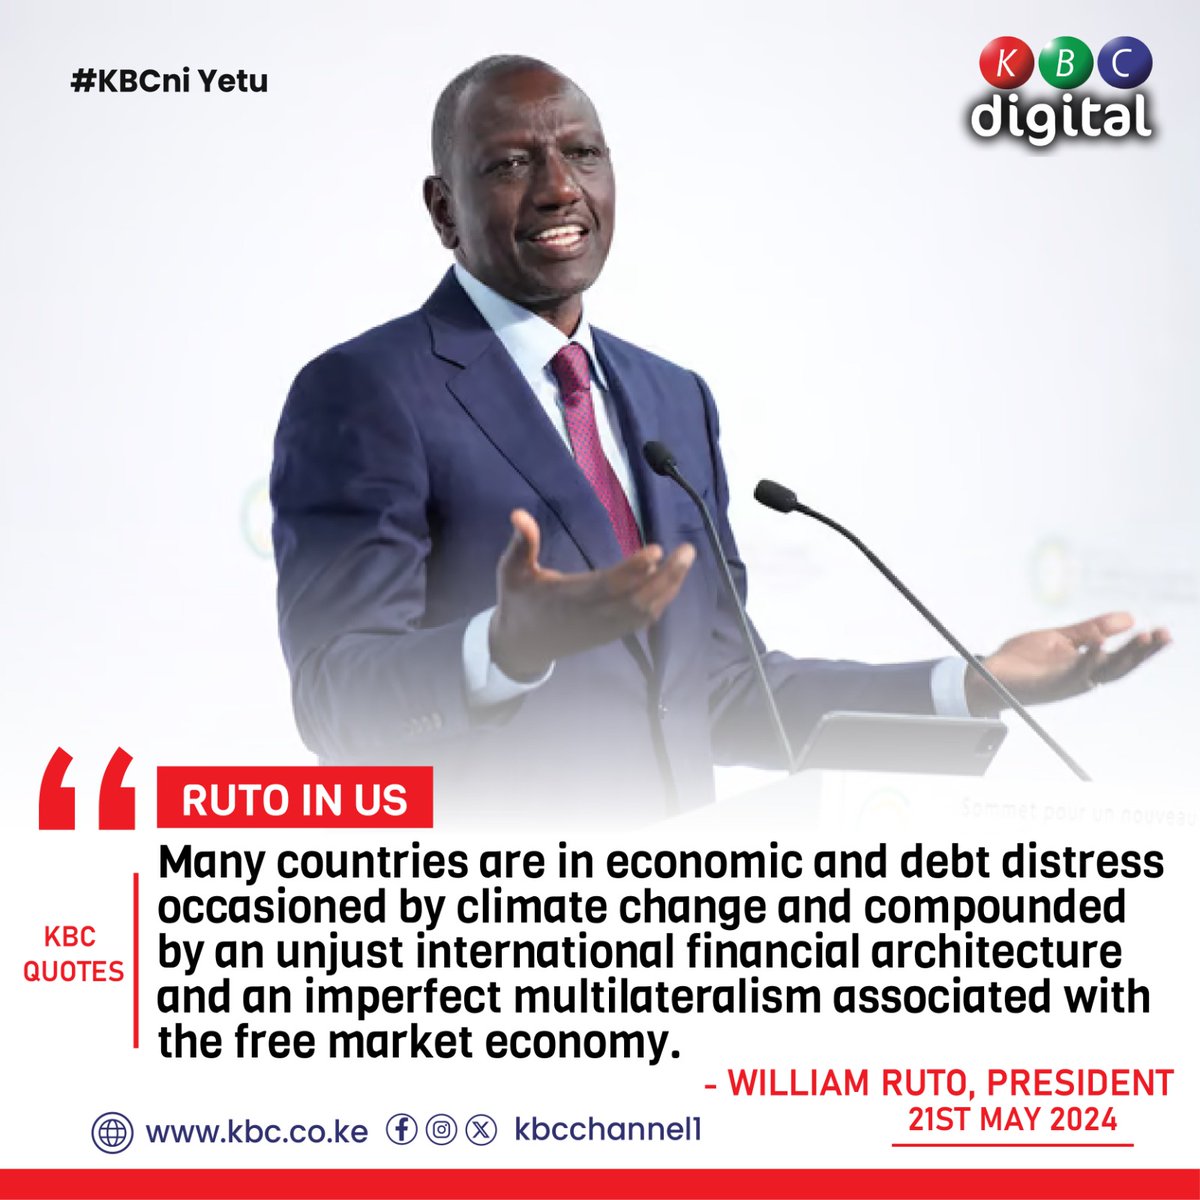 'Many countries are in economic and debt distress occasioned by climate change and compounded by an unjust international financial architecture and an imperfect multilateralism associated with the free market economy.' President William Ruto #KBCniYetu ^RO